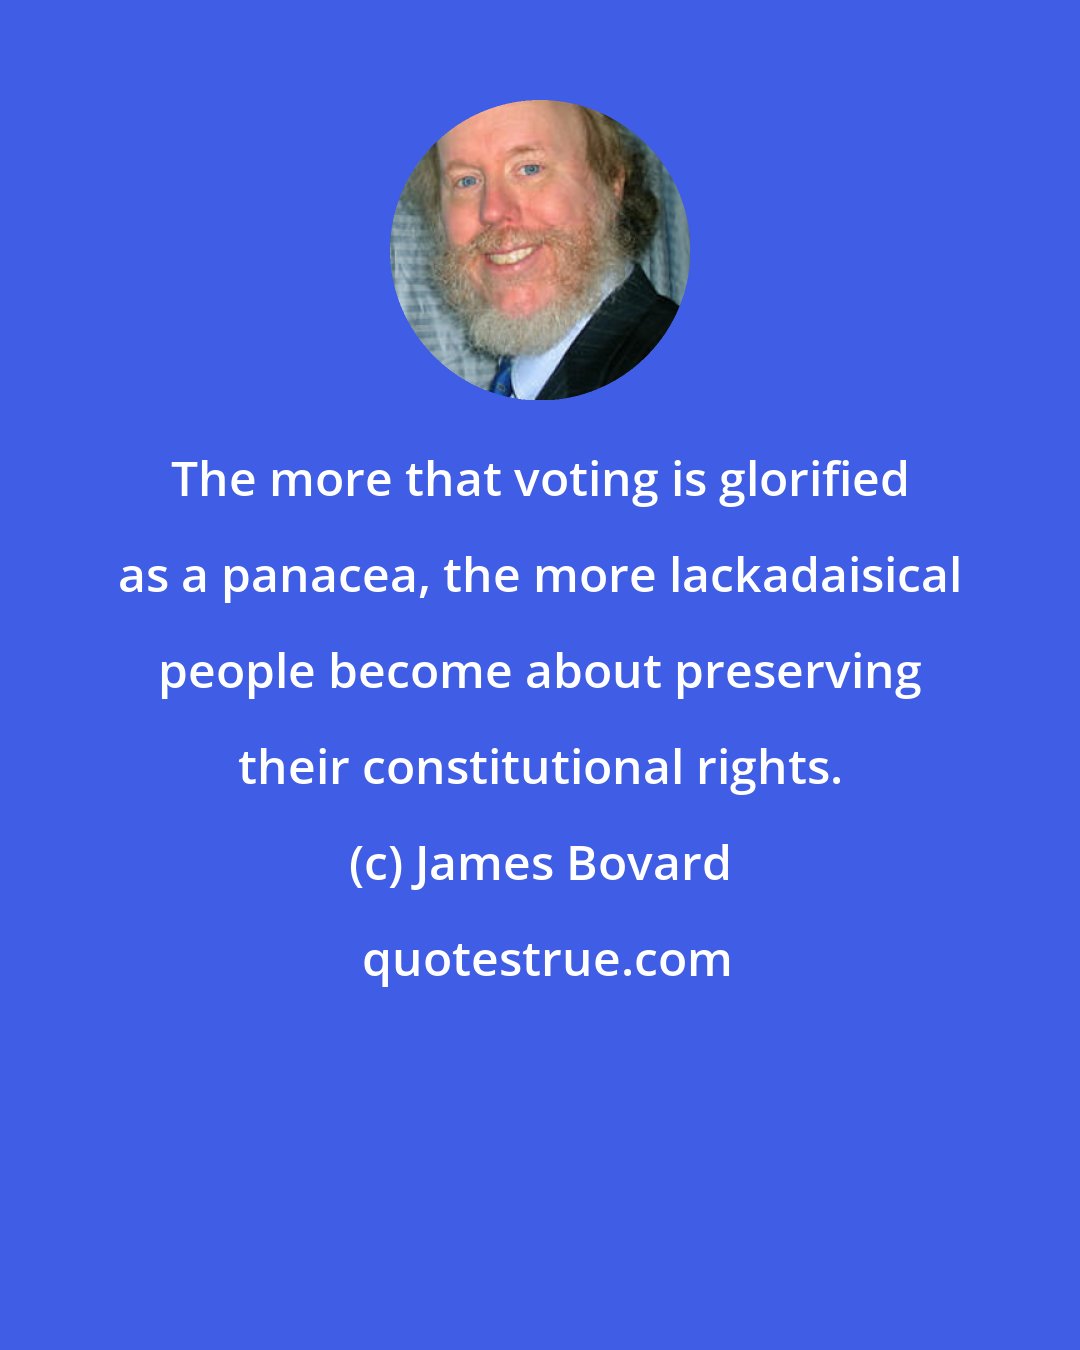 James Bovard: The more that voting is glorified as a panacea, the more lackadaisical people become about preserving their constitutional rights.